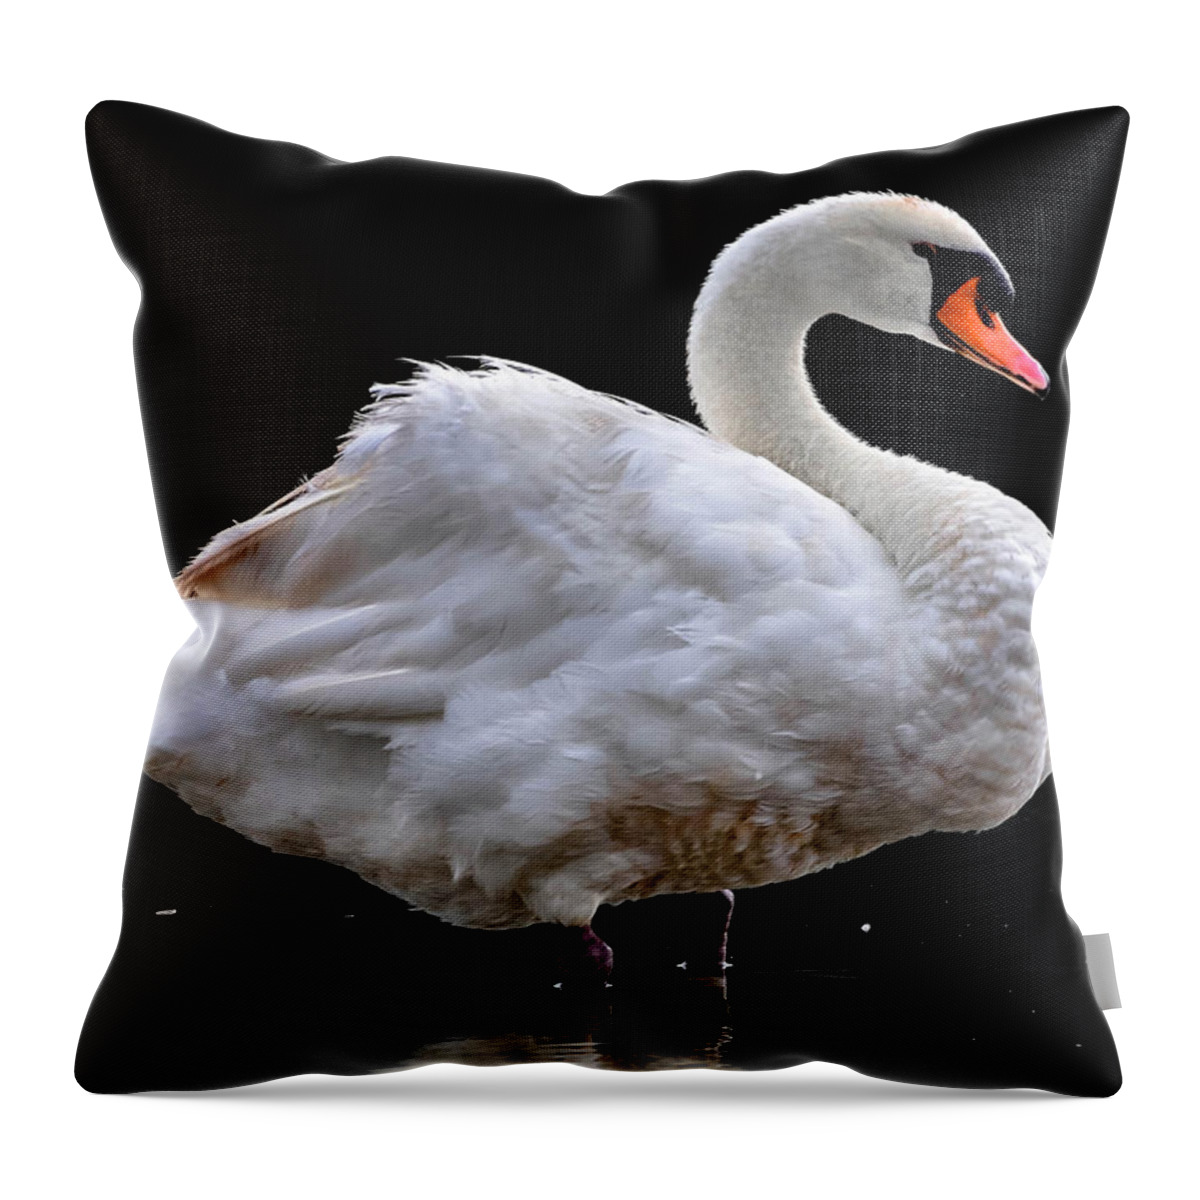  Throw Pillow featuring the photograph Mute Swan 3 by Brian Stevens